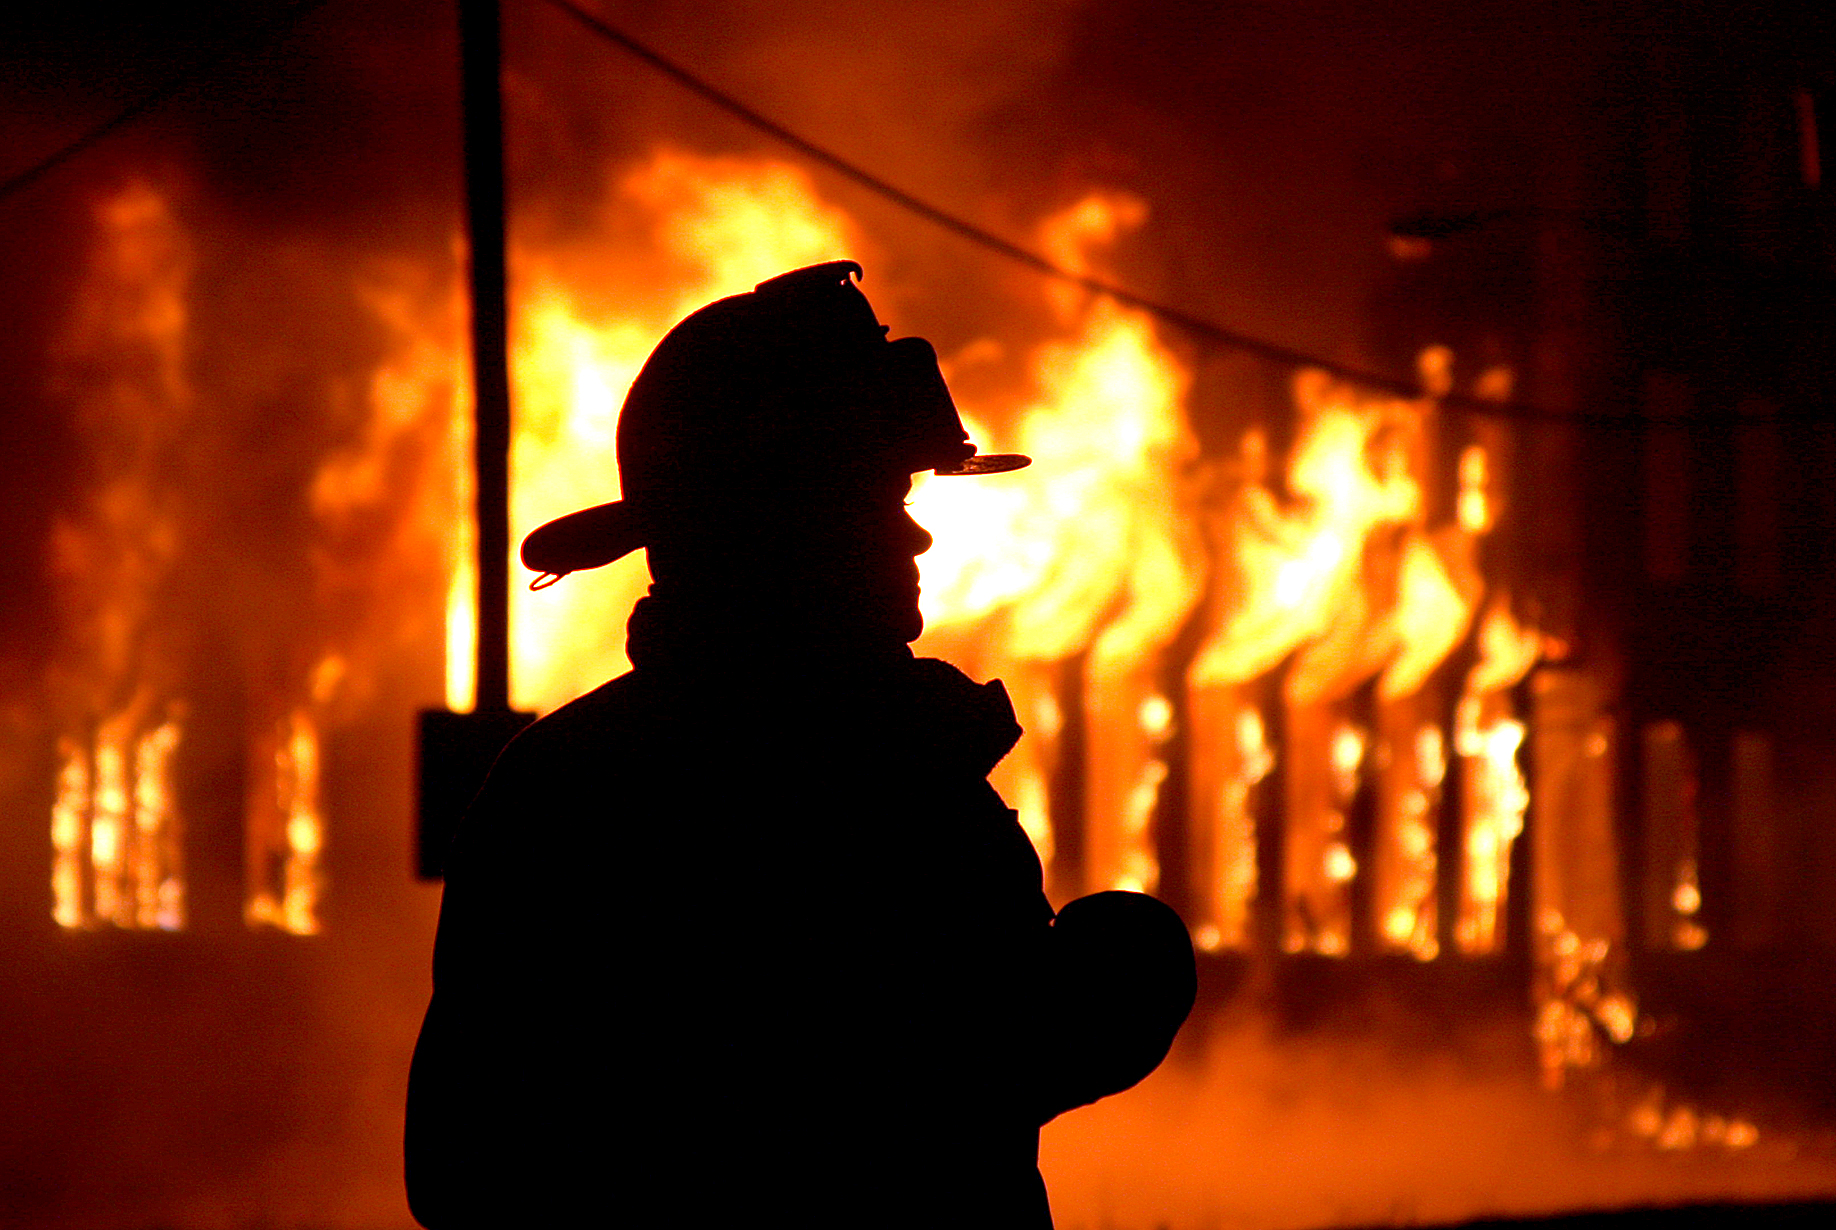 Firefighters make American towns safe, www.greatamericanthings.net